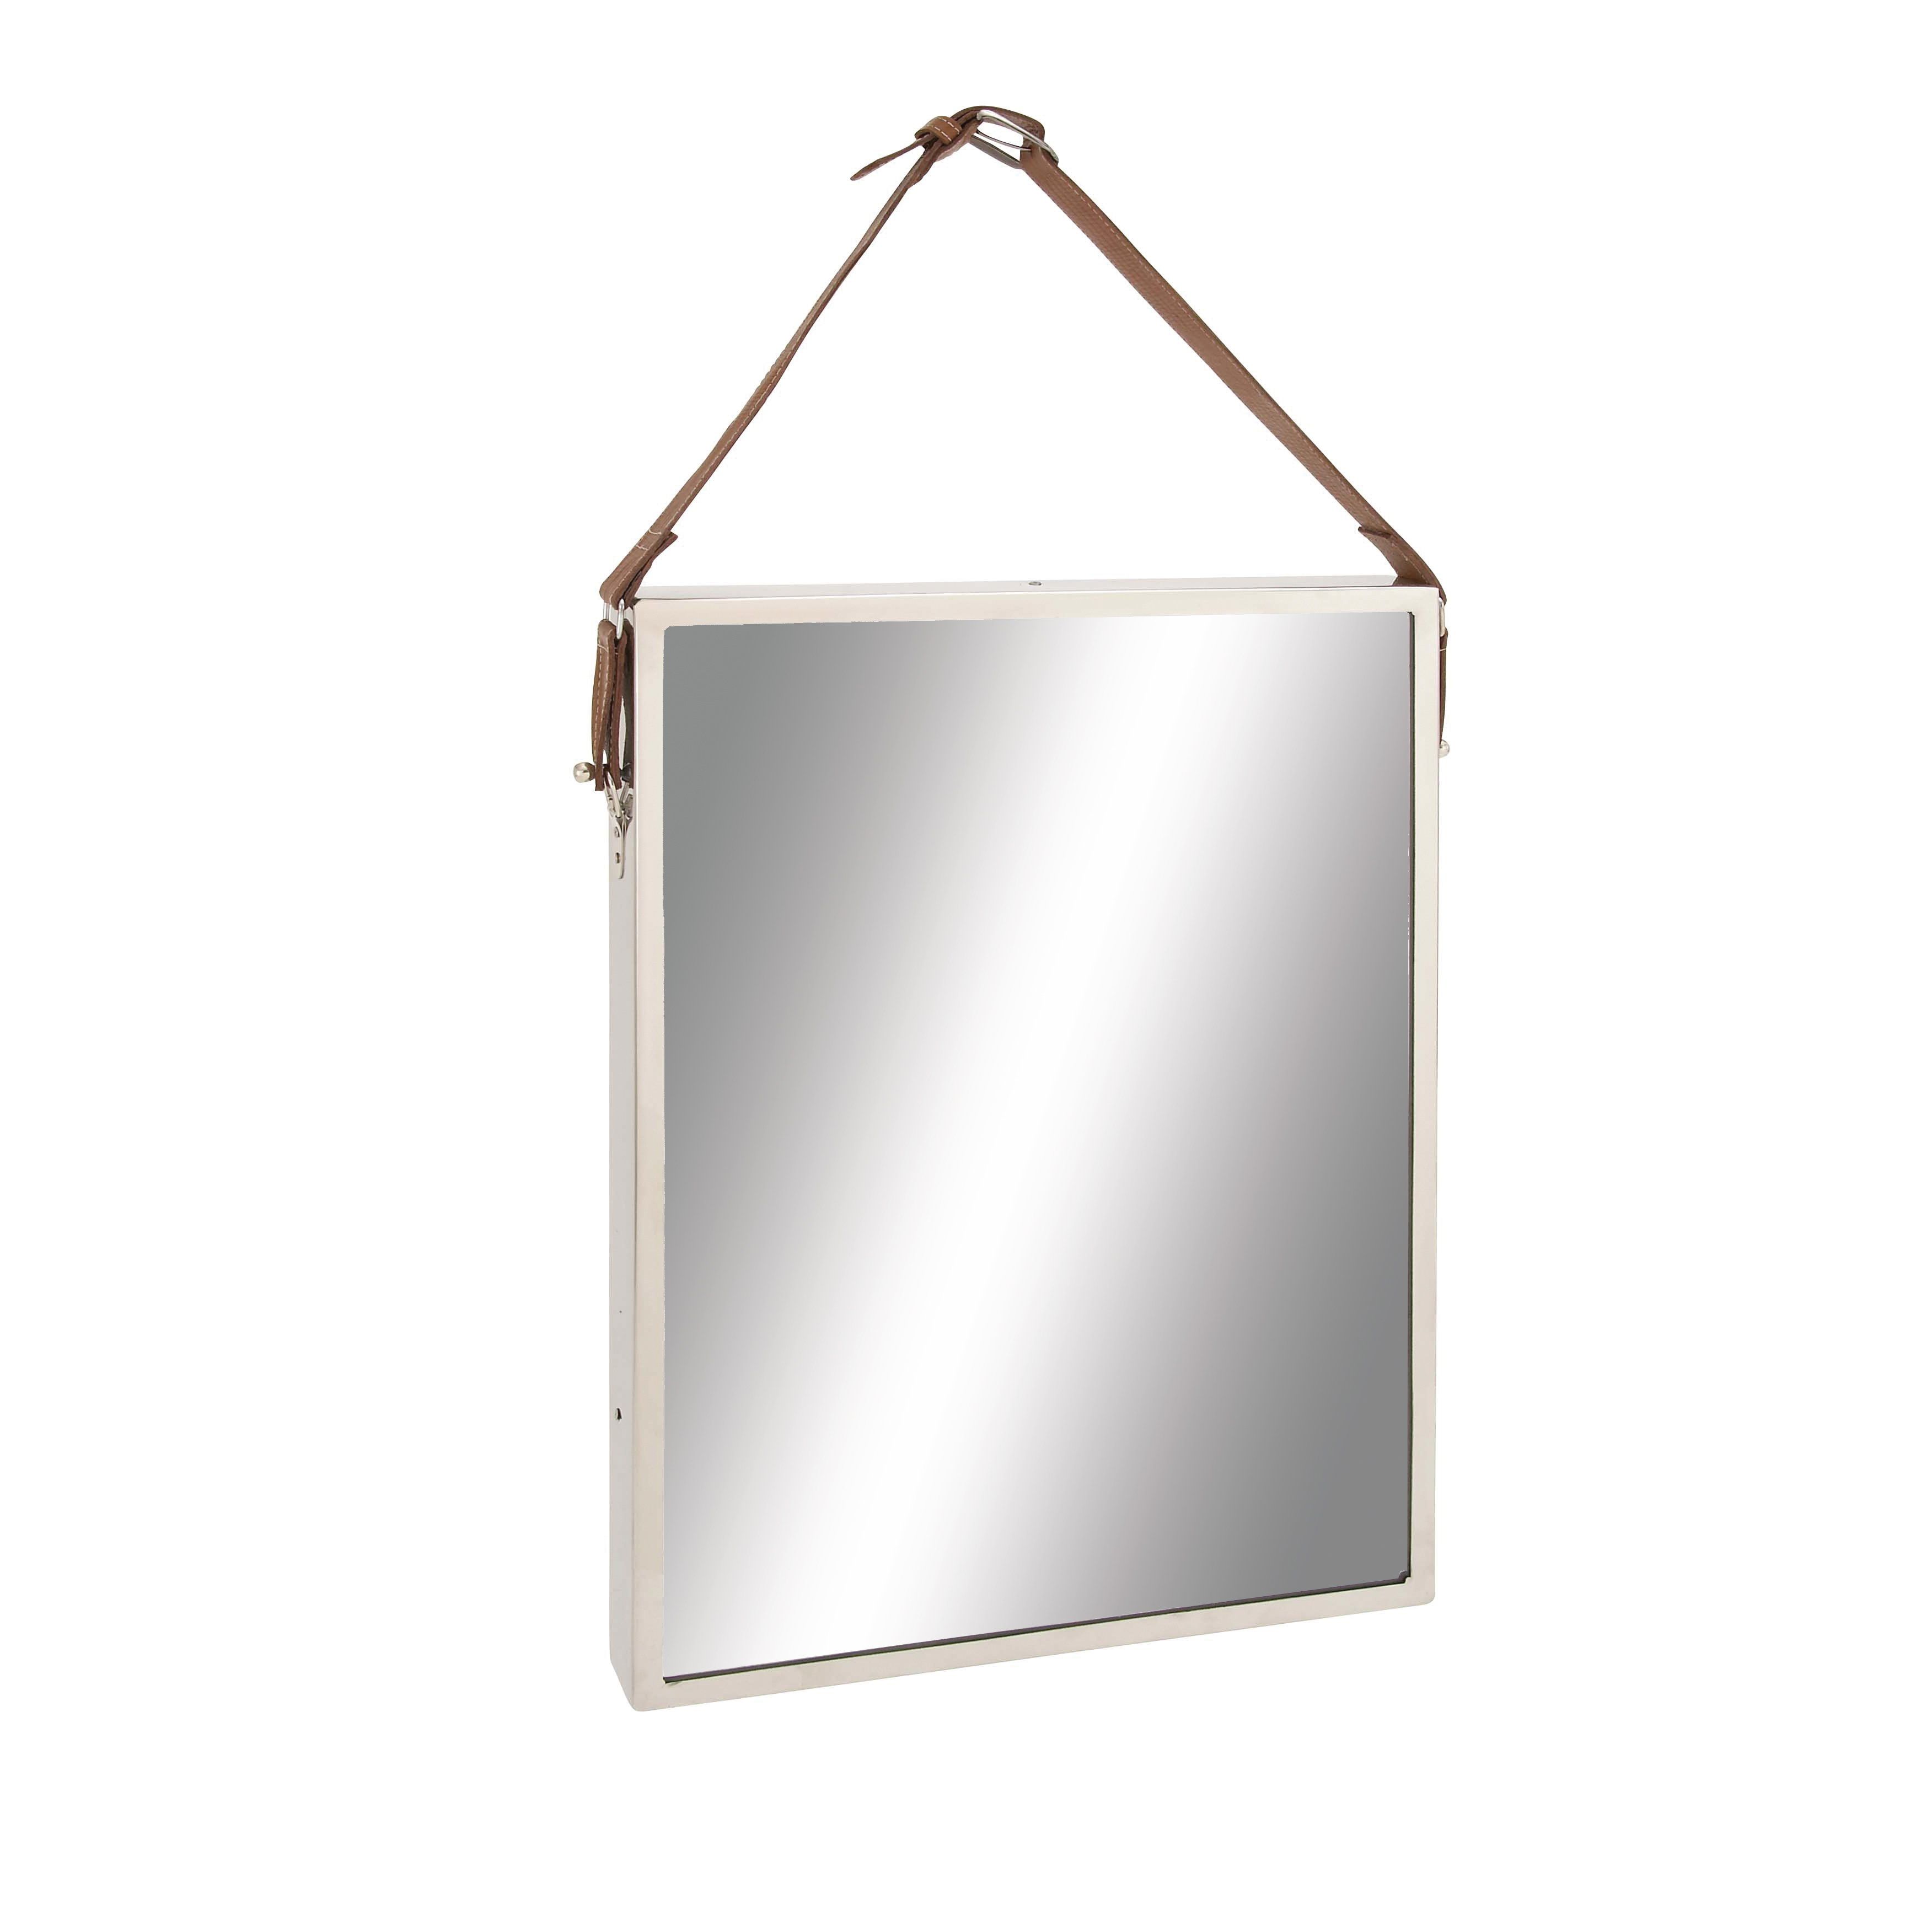 Woodland Imports The Slick Stainless Steel Leather Wall Mirror With Leather Wall Mirrors (View 15 of 15)